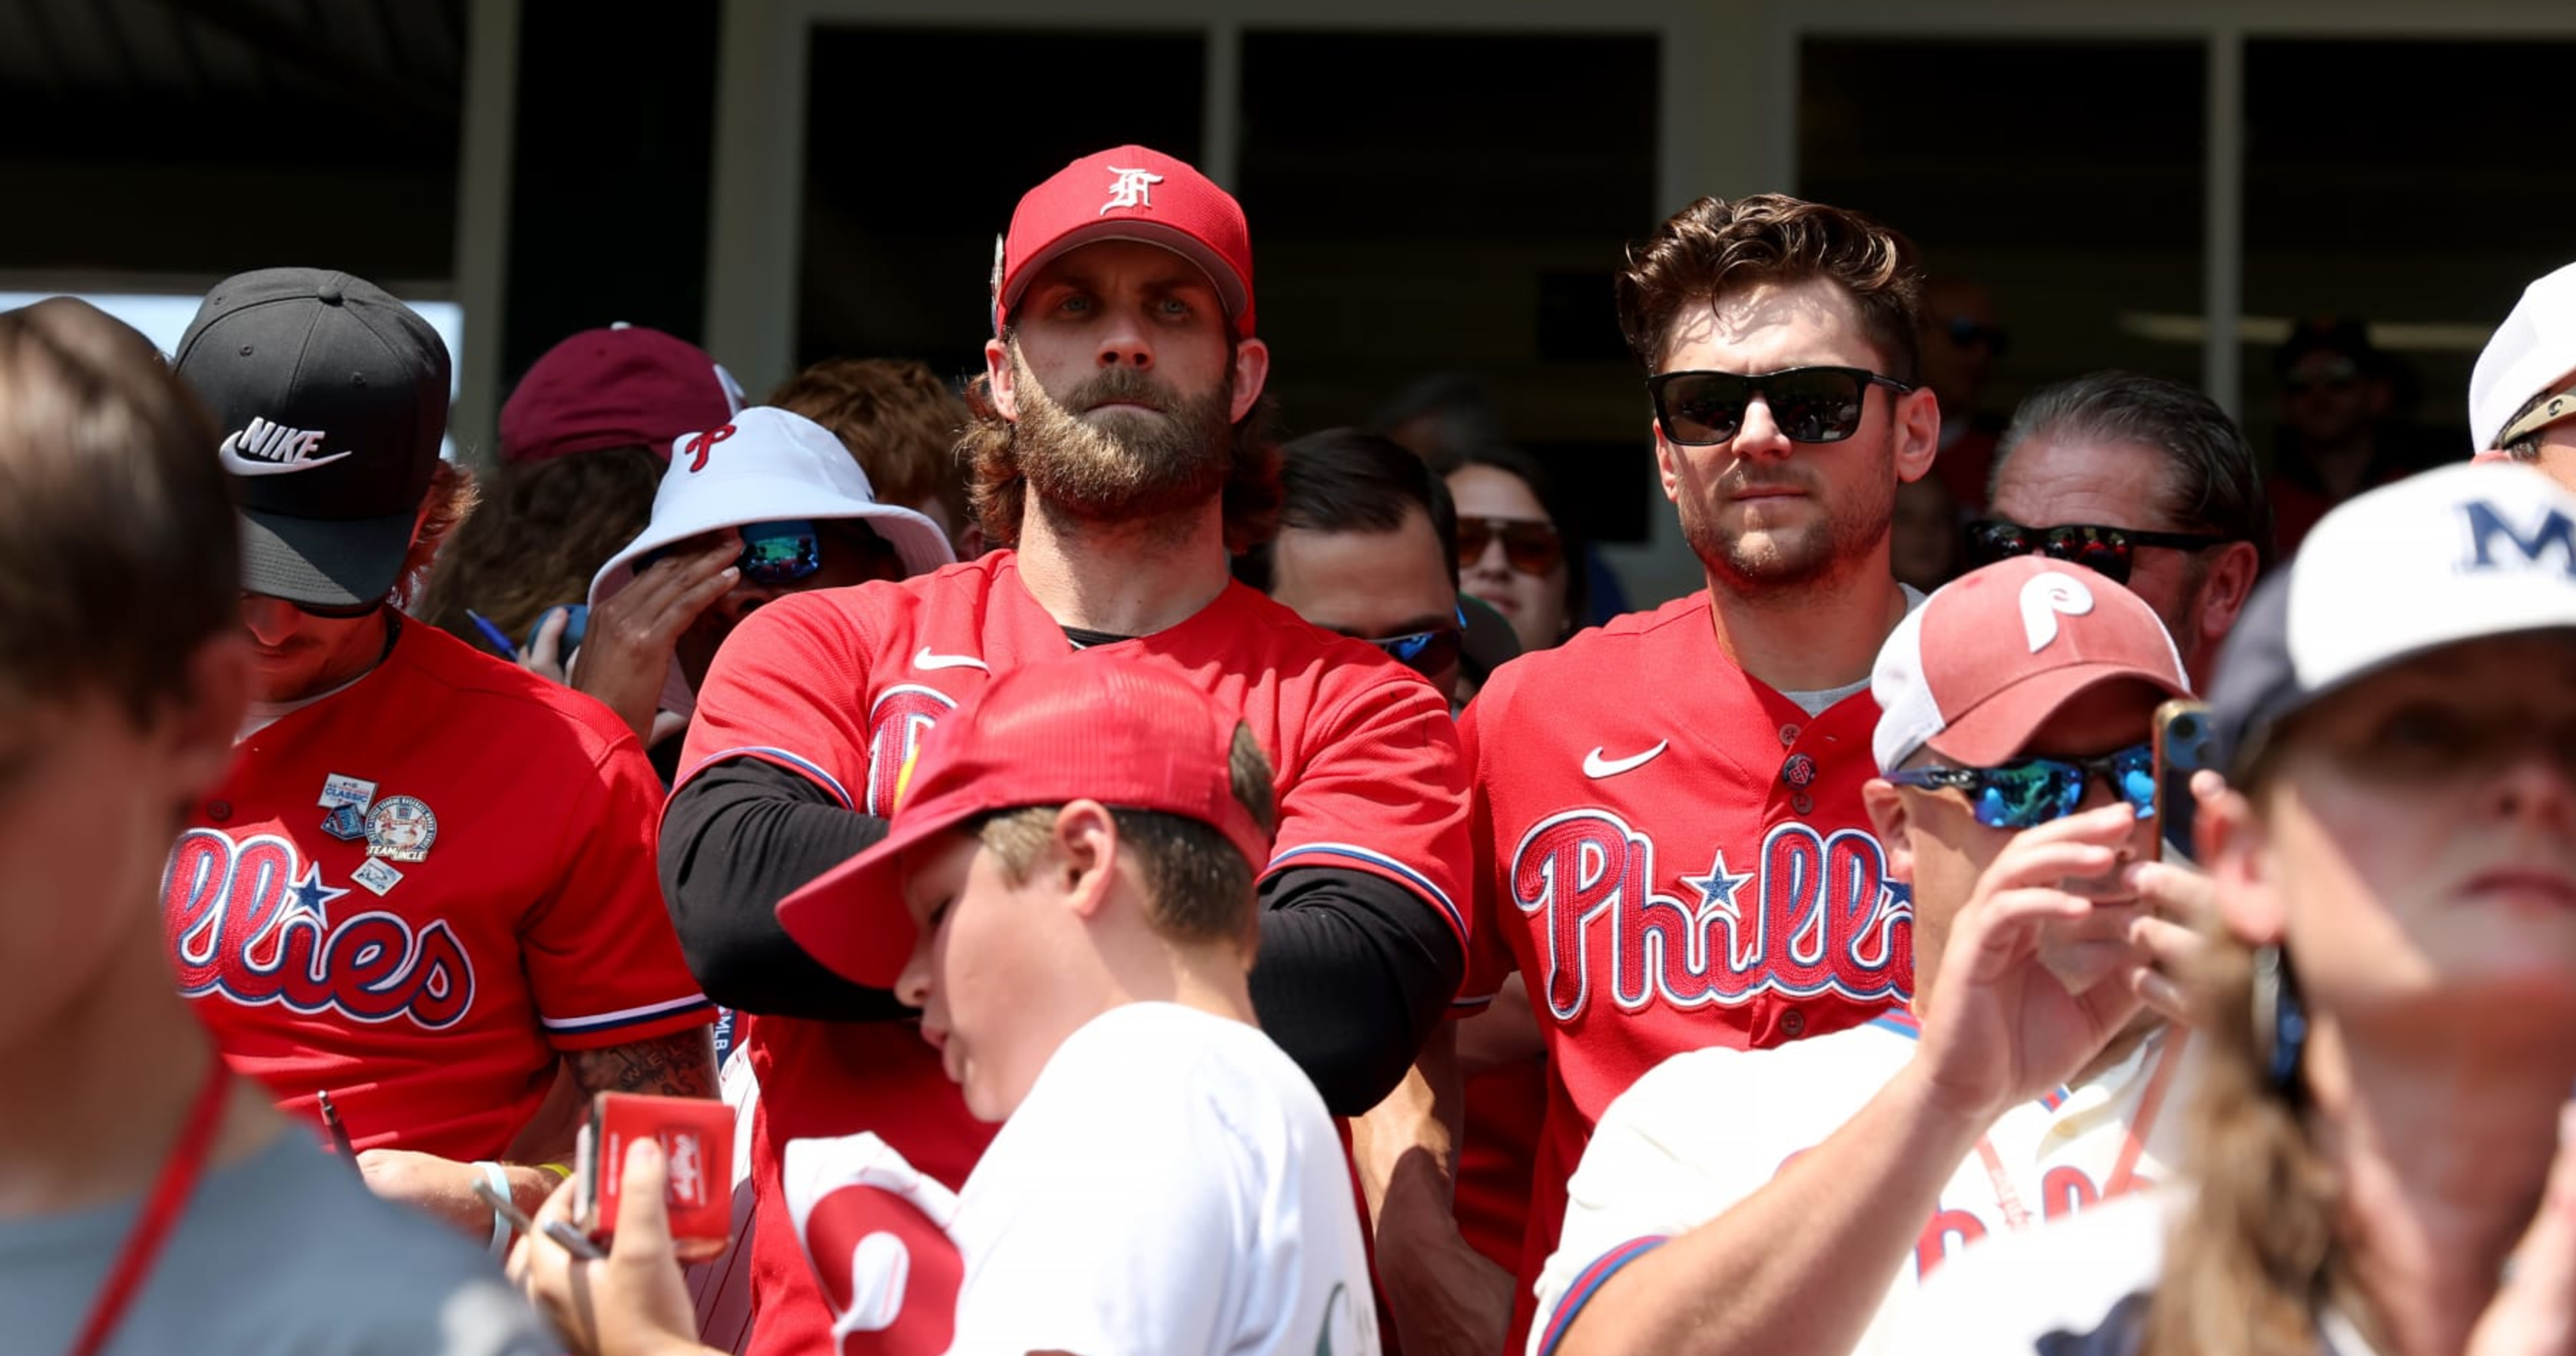 The story of Bryce Harper meeting a baby at Nationals spring